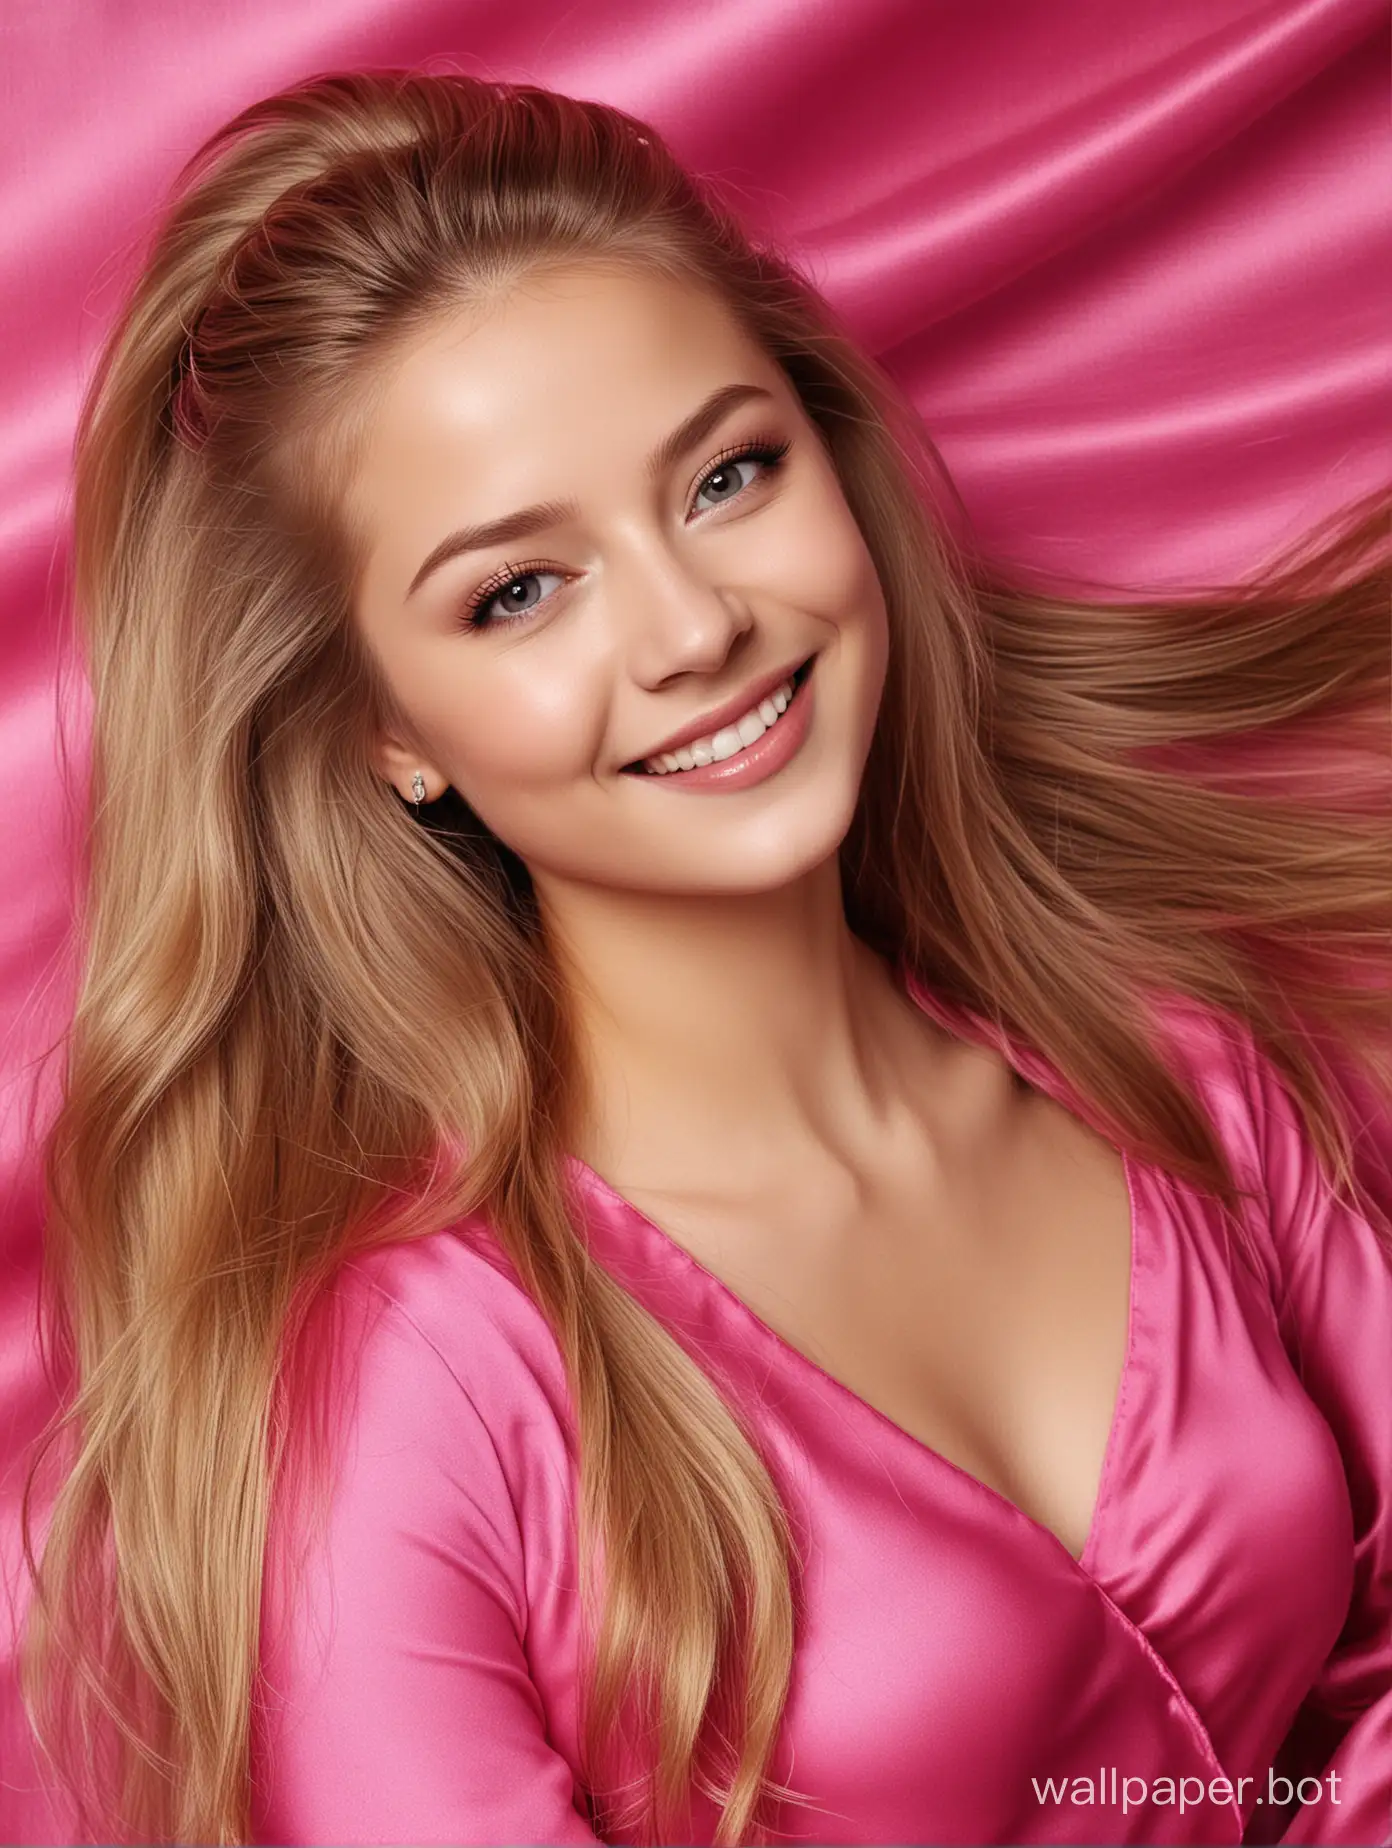 Sweet Yulia Lipnitskaya smiles with long straight silky hair in long Beautiful, gentle, Luxurious glamour natural hot pink fuchsia mulberry silk fabric